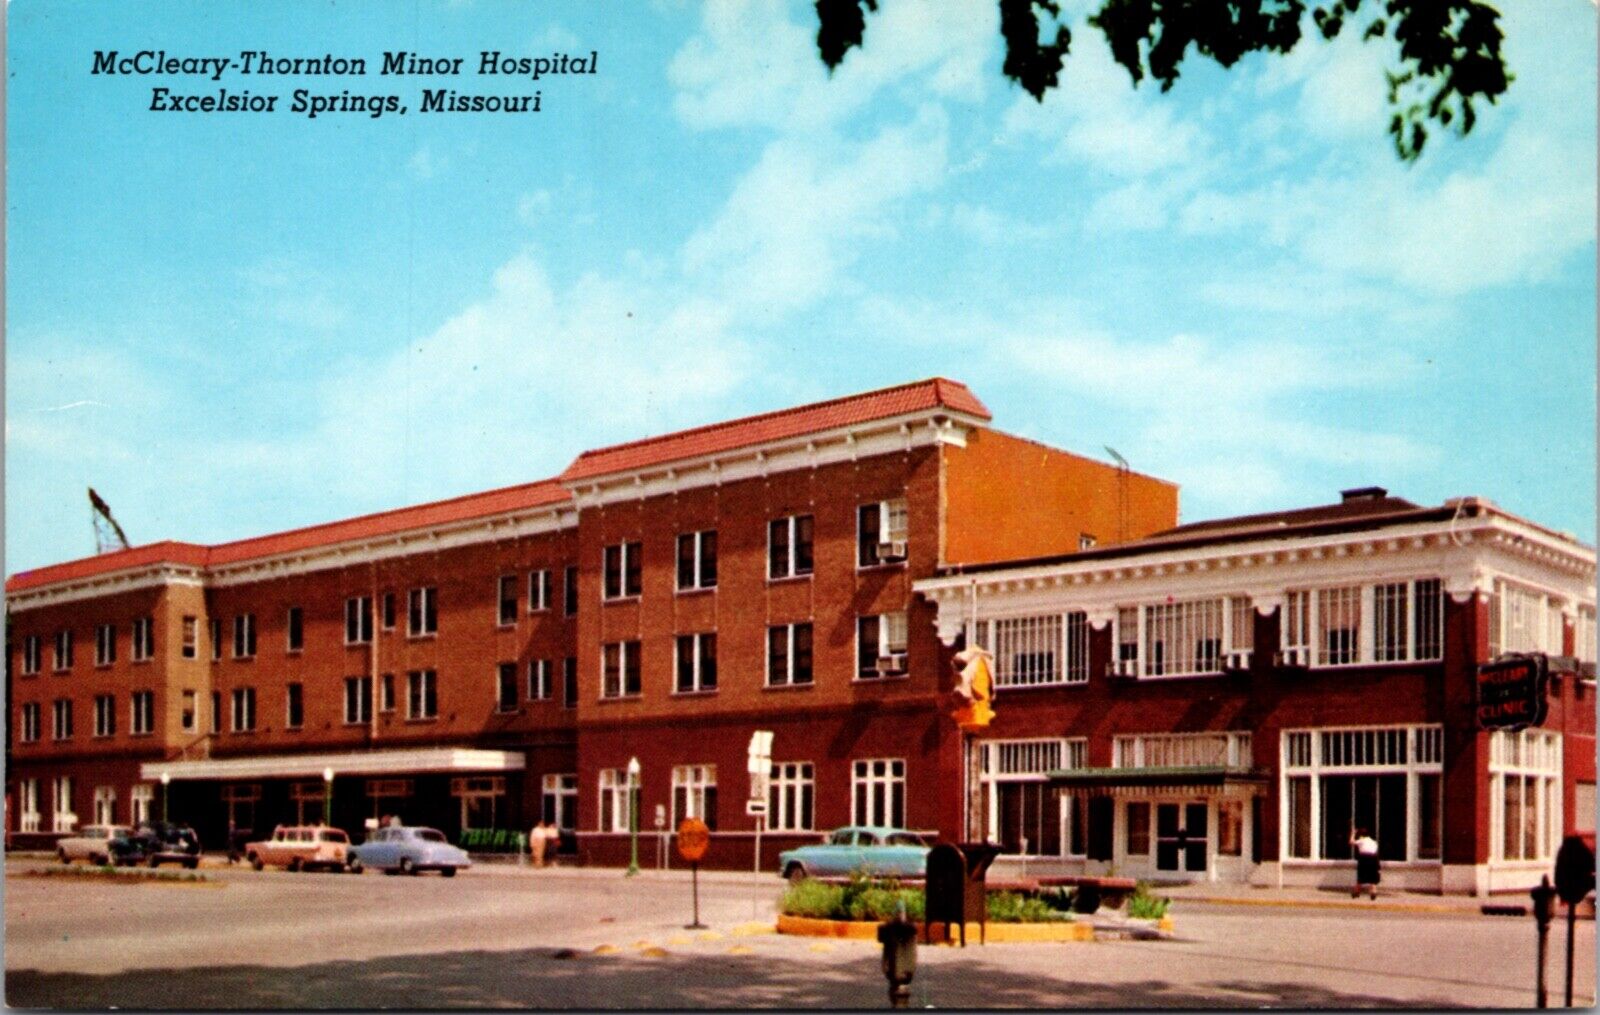 Postcard McCleary-Thornton Minor Hospital in Excelsior Springs, Missouri